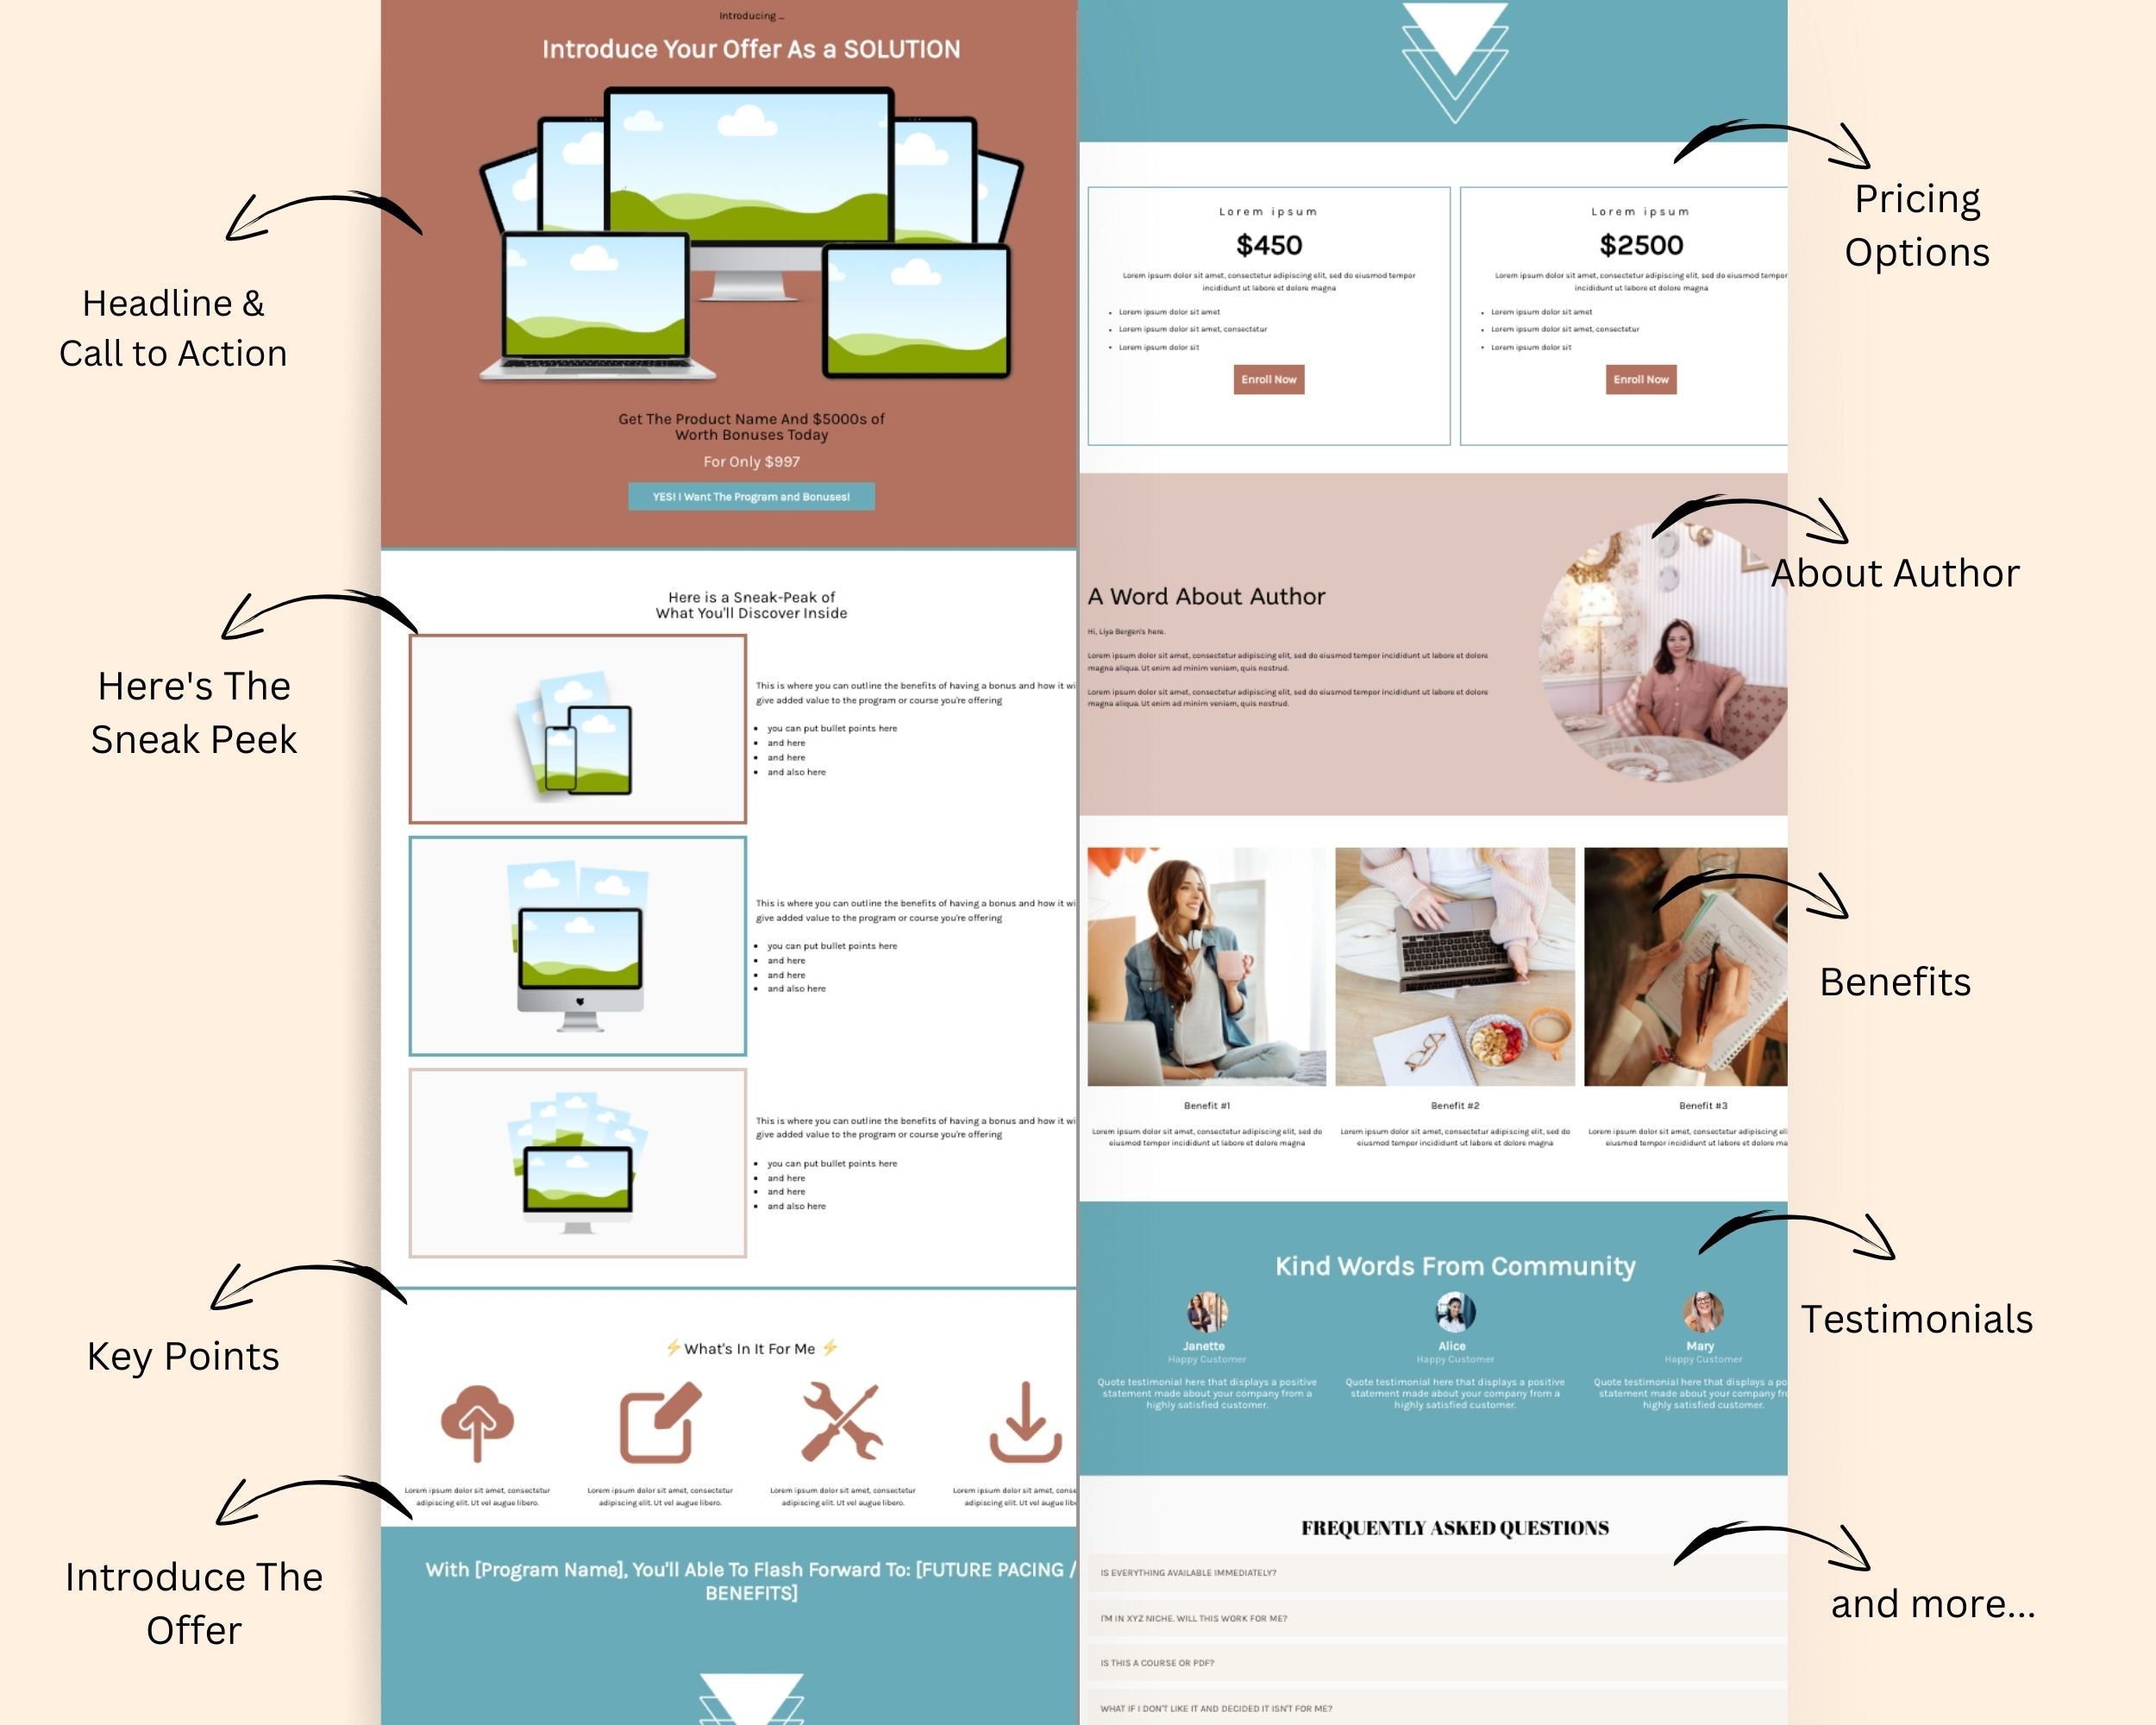 Boho Online Course Sales Page Template in Thrivecart